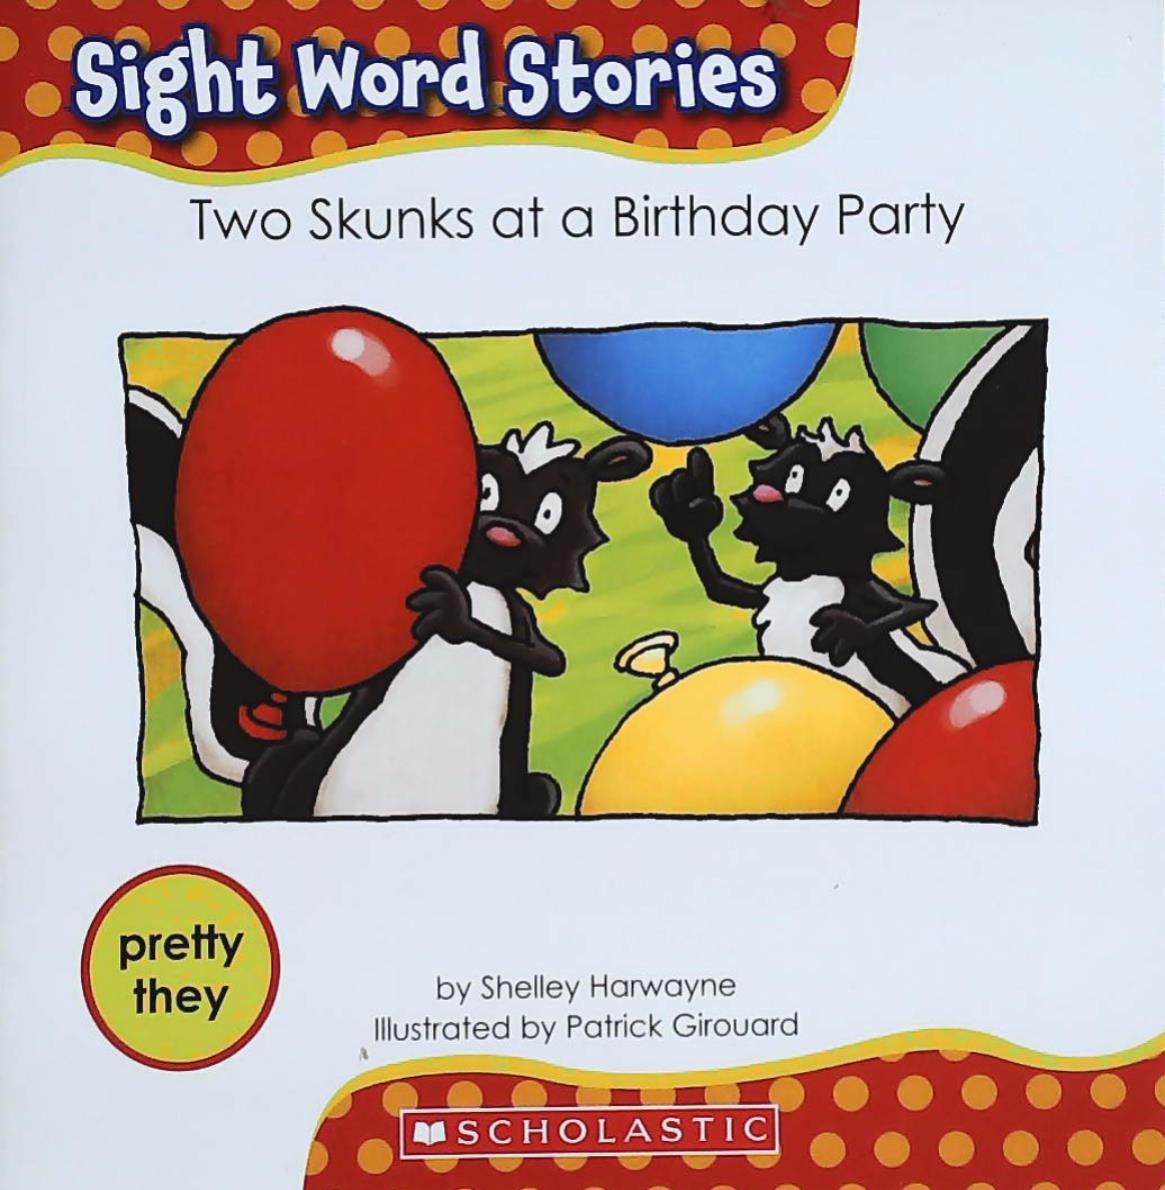 Livre ISBN 0545166314 Sight Word Stories : Two Skunks at a Birthday Party (Shelley Harwayne)